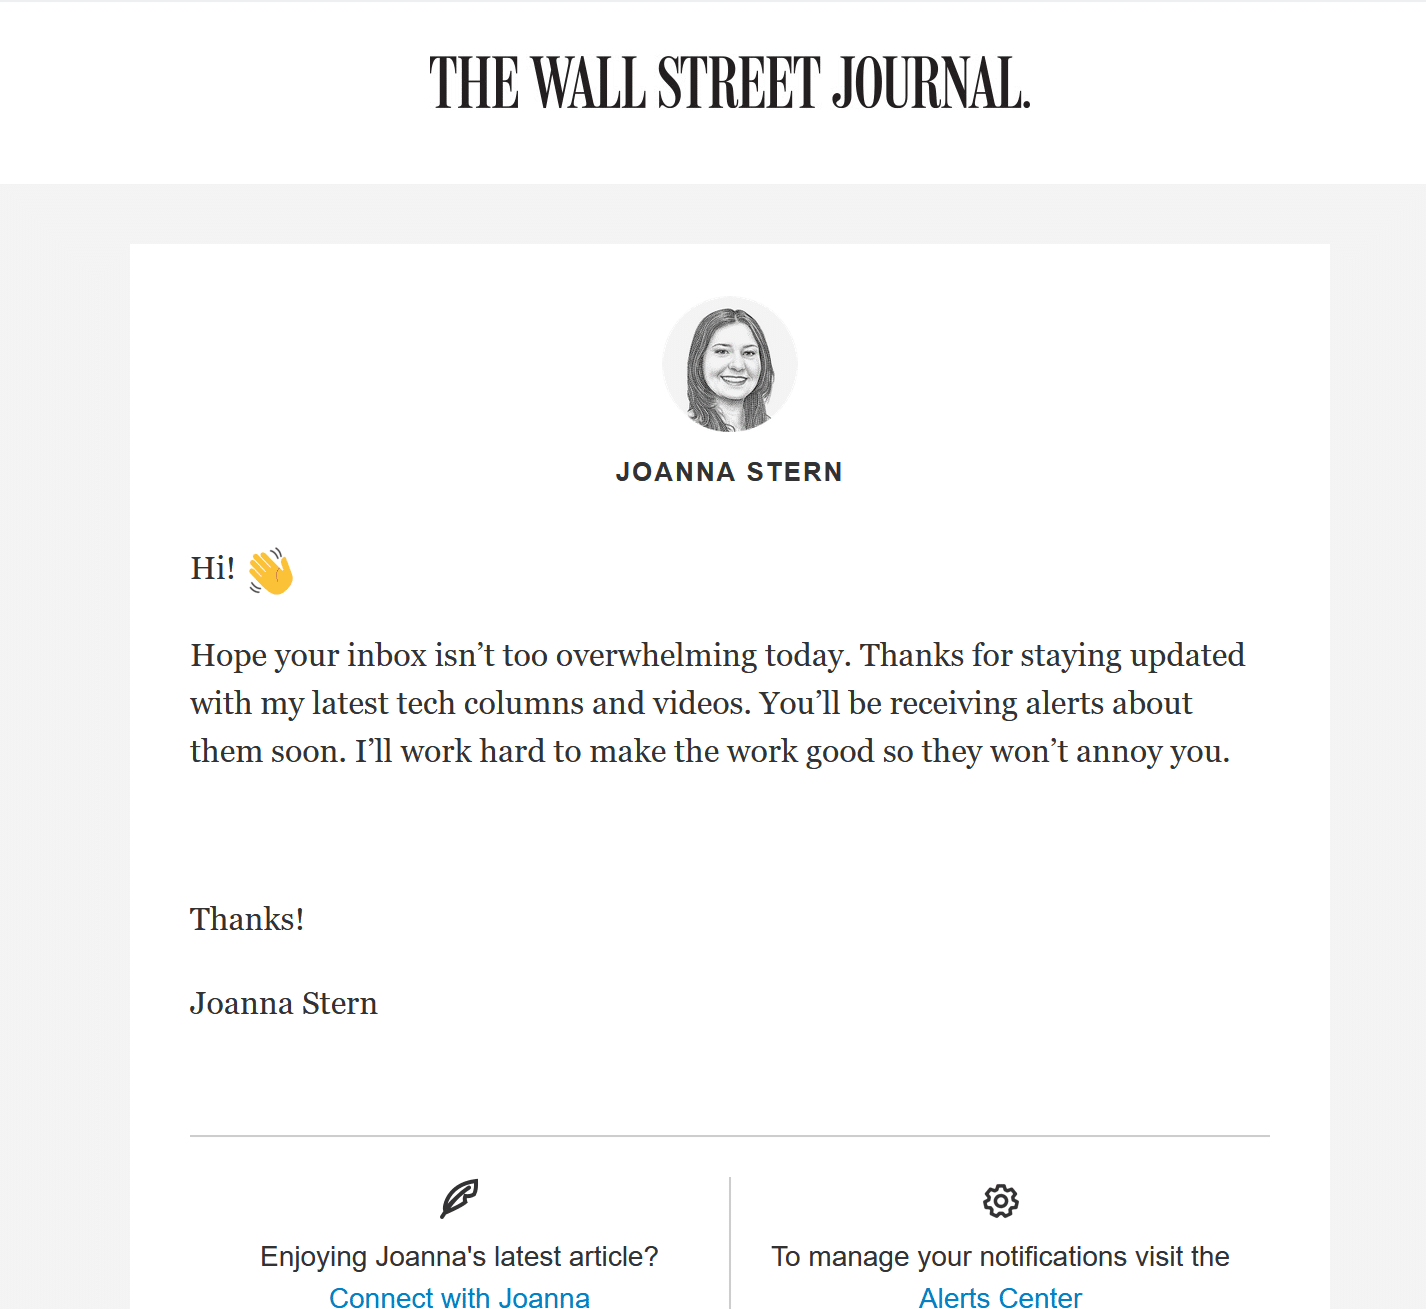 wsj-email-example